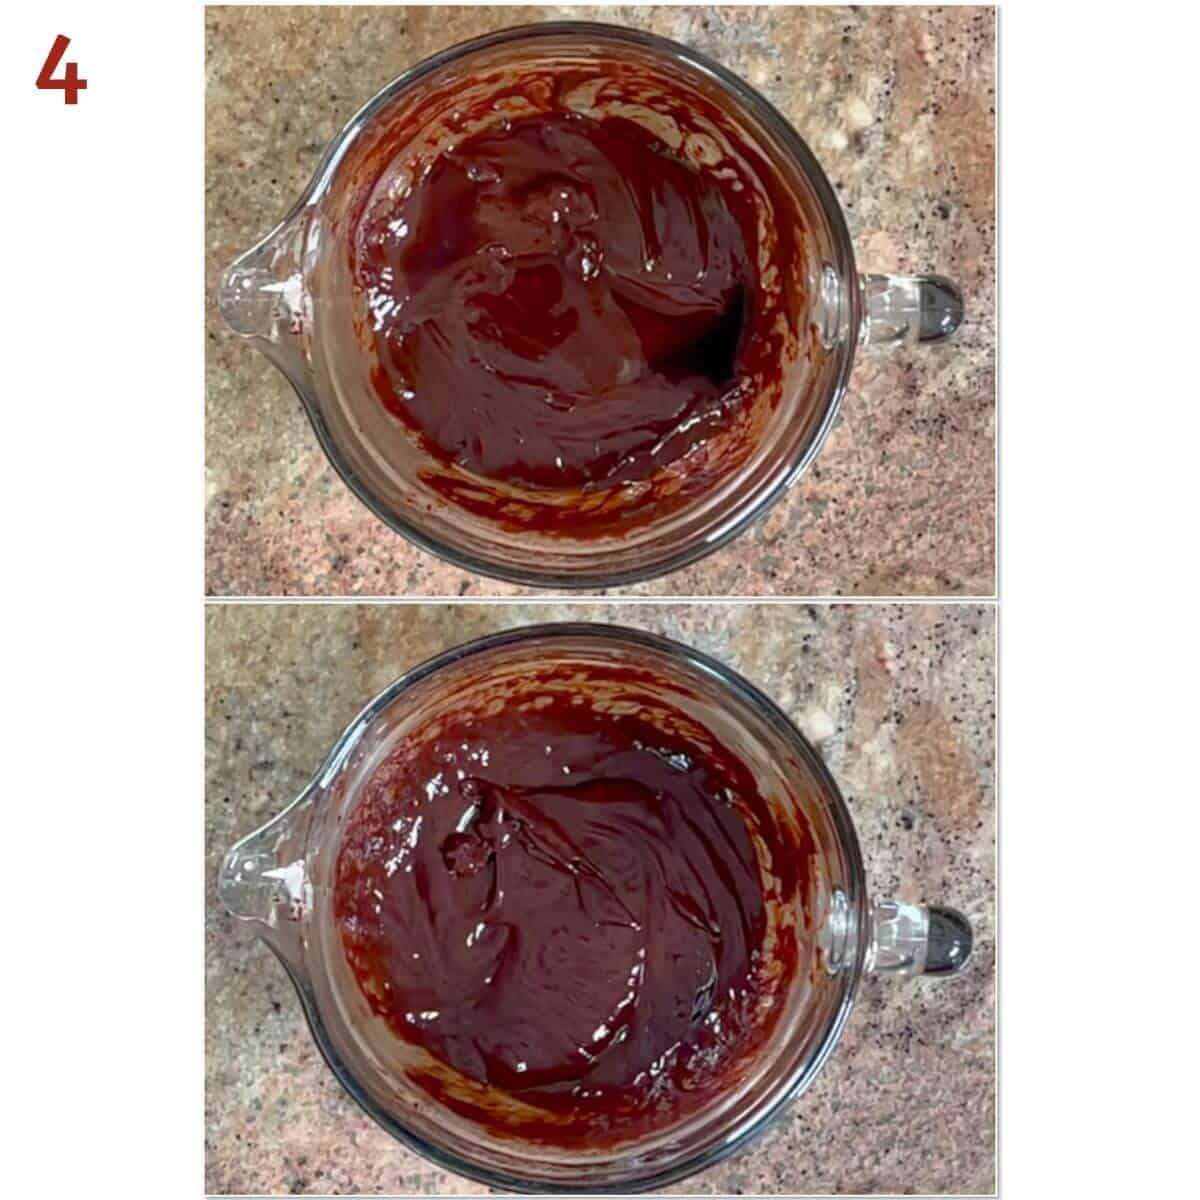 Collage of adding vanilla and corn syrup to chocolate ganache in a glass bowl.